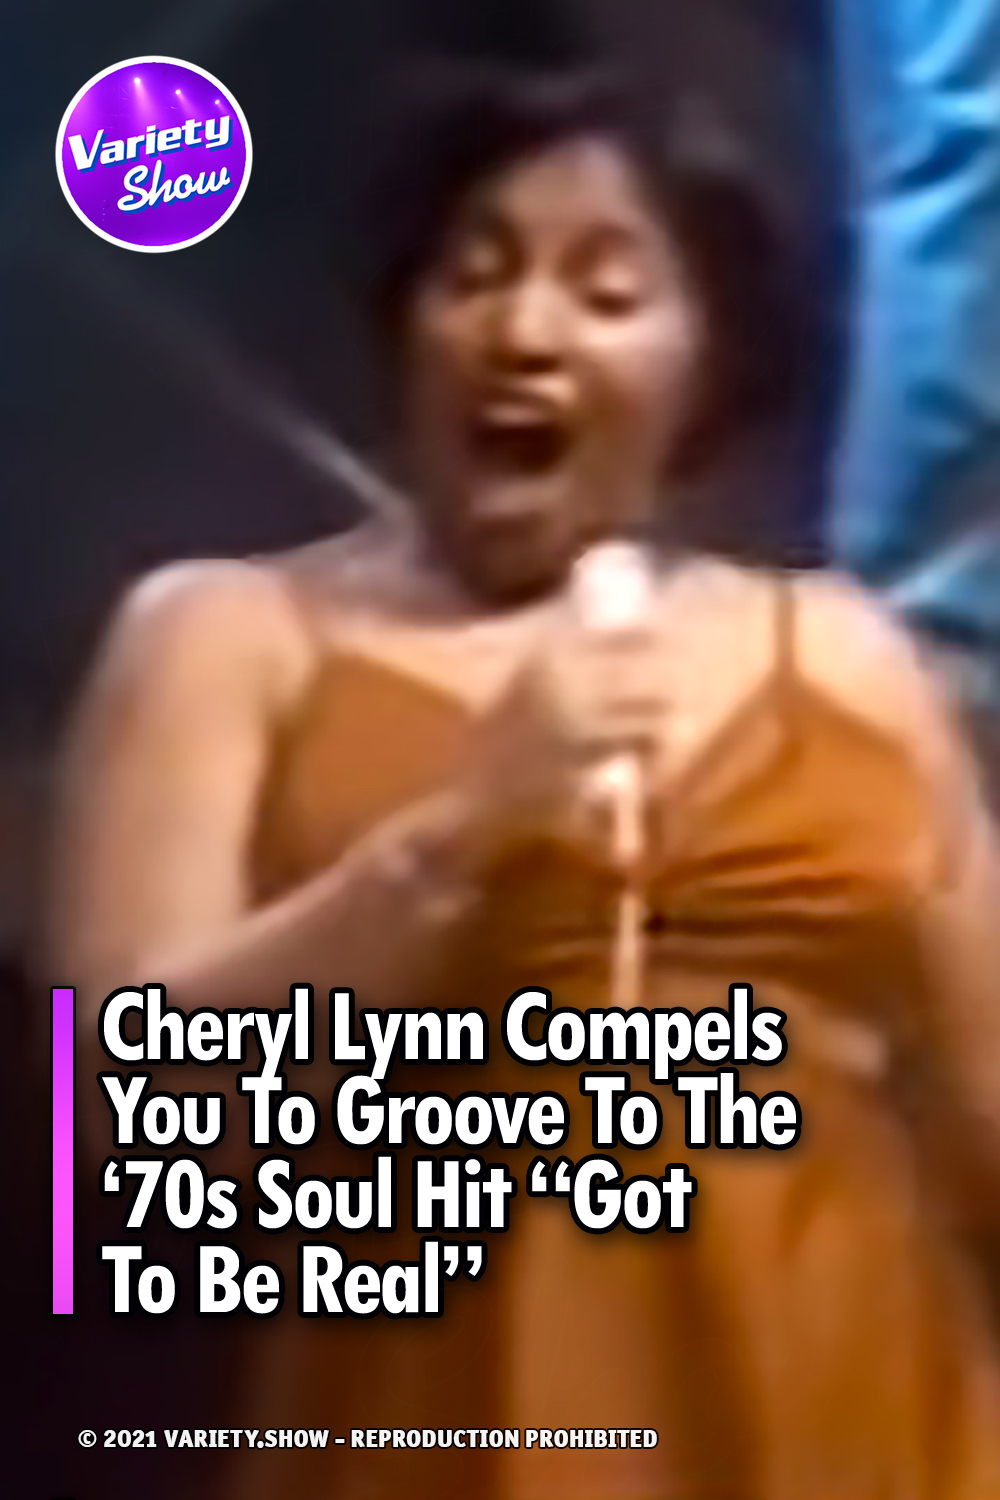 Cheryl Lynn Compels You To Groove To The ‘70s Soul Hit “Got To Be Real”